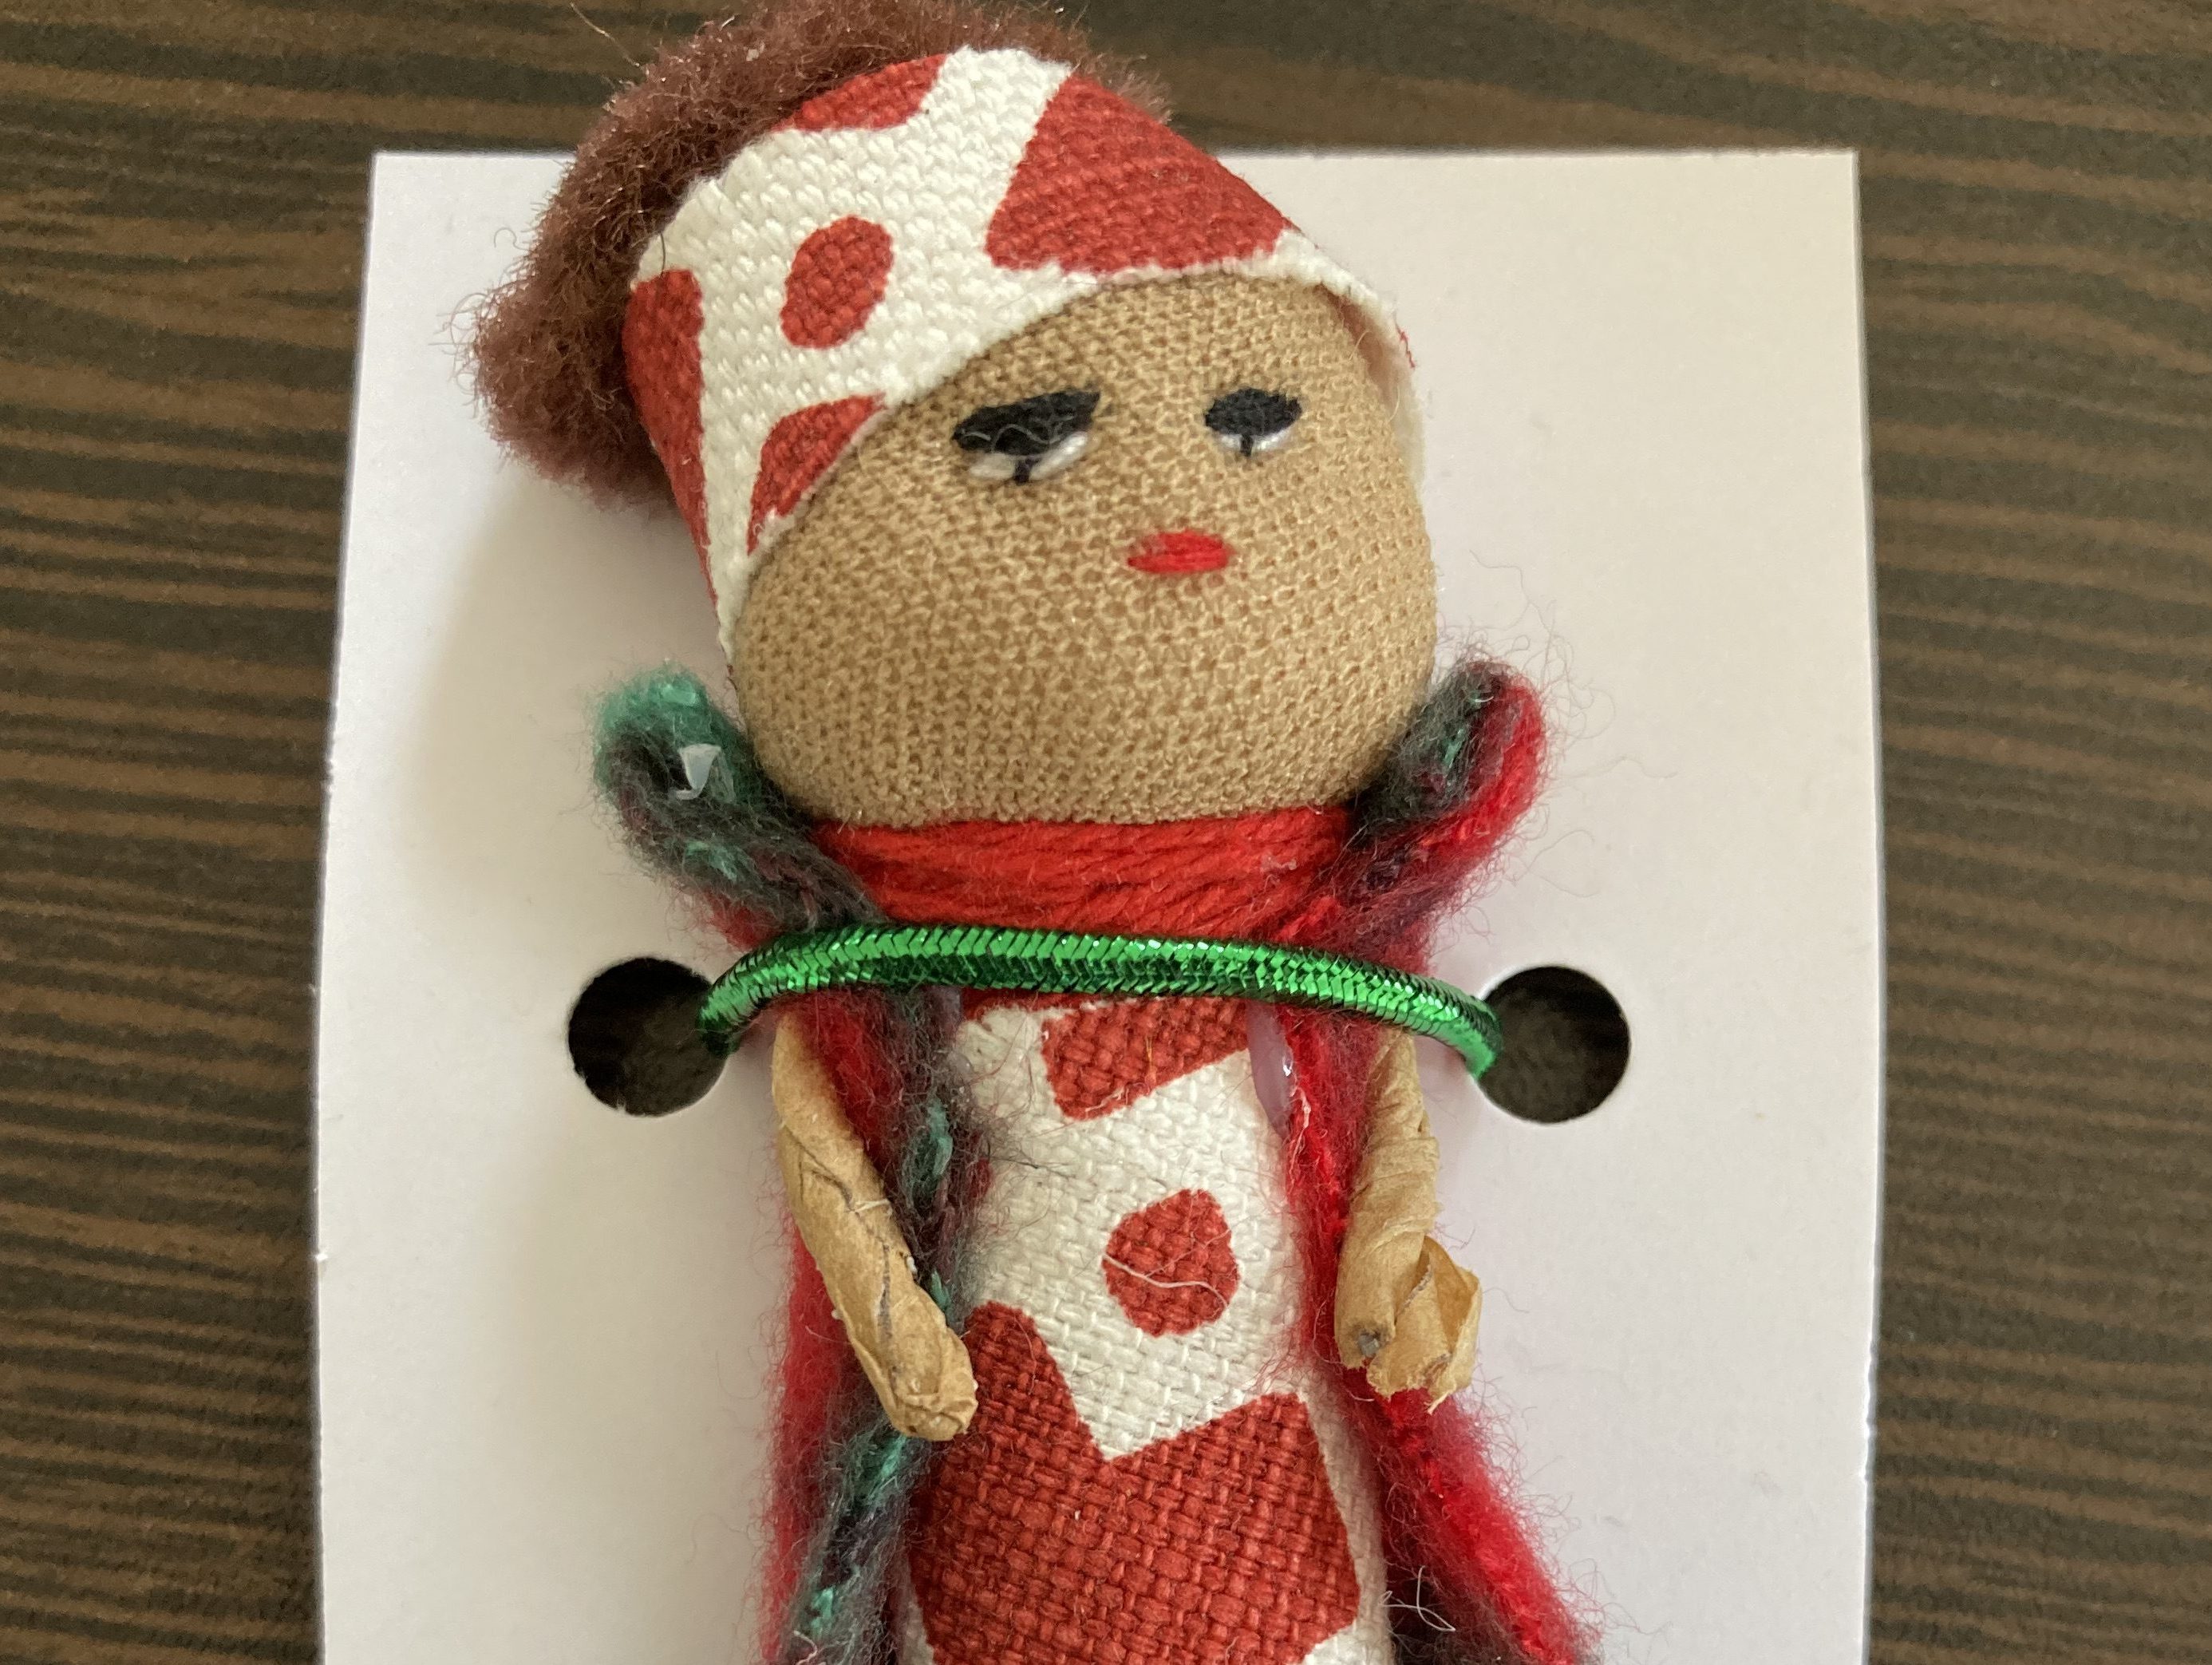 African Worry Doll. Image: Supplied / Ilana Sharlin Stone